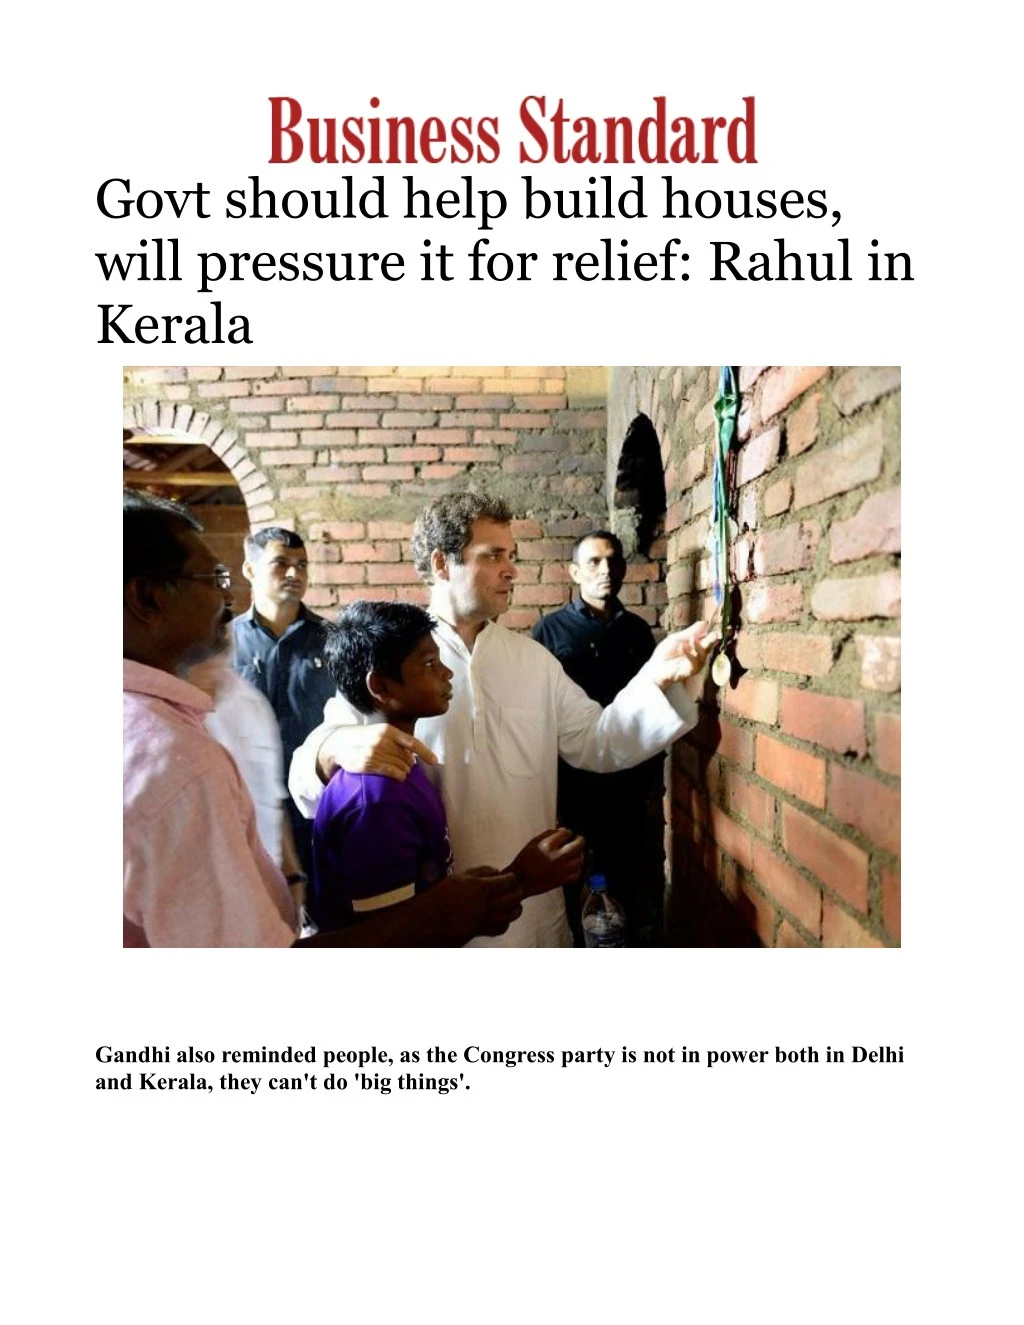 govt should help build houses will pressure